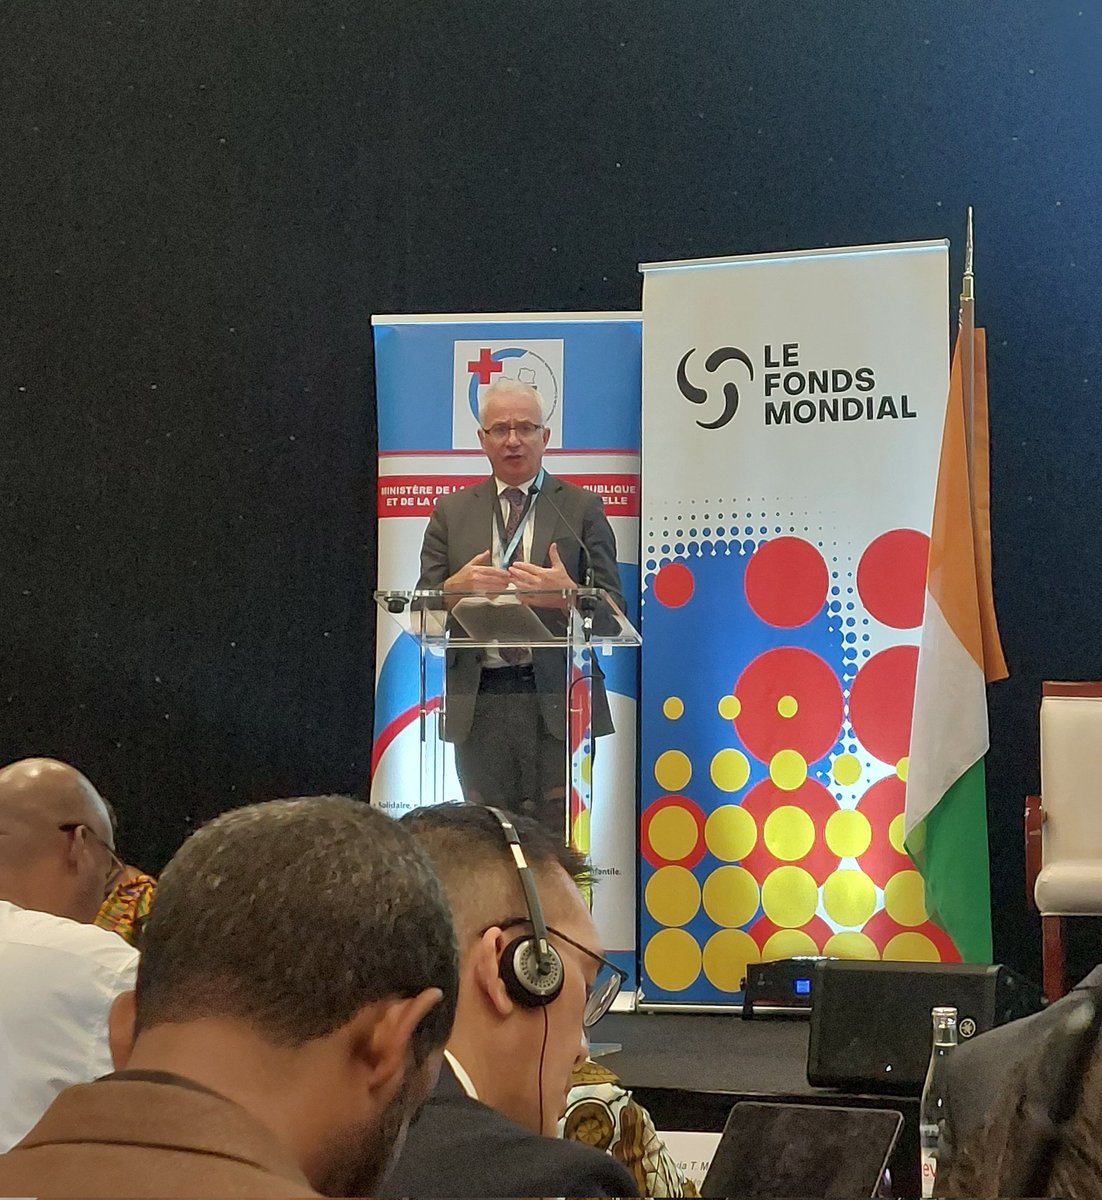 @PeterASands, Executive Director of @GlobalFund speaks on how partnerships with civil society and community is critical for ending #AIDS and:  ➡️ Ensuring health equity ➡️Dismantling human rights barriers ➡️ Ensuring no one is left behind #WHA77